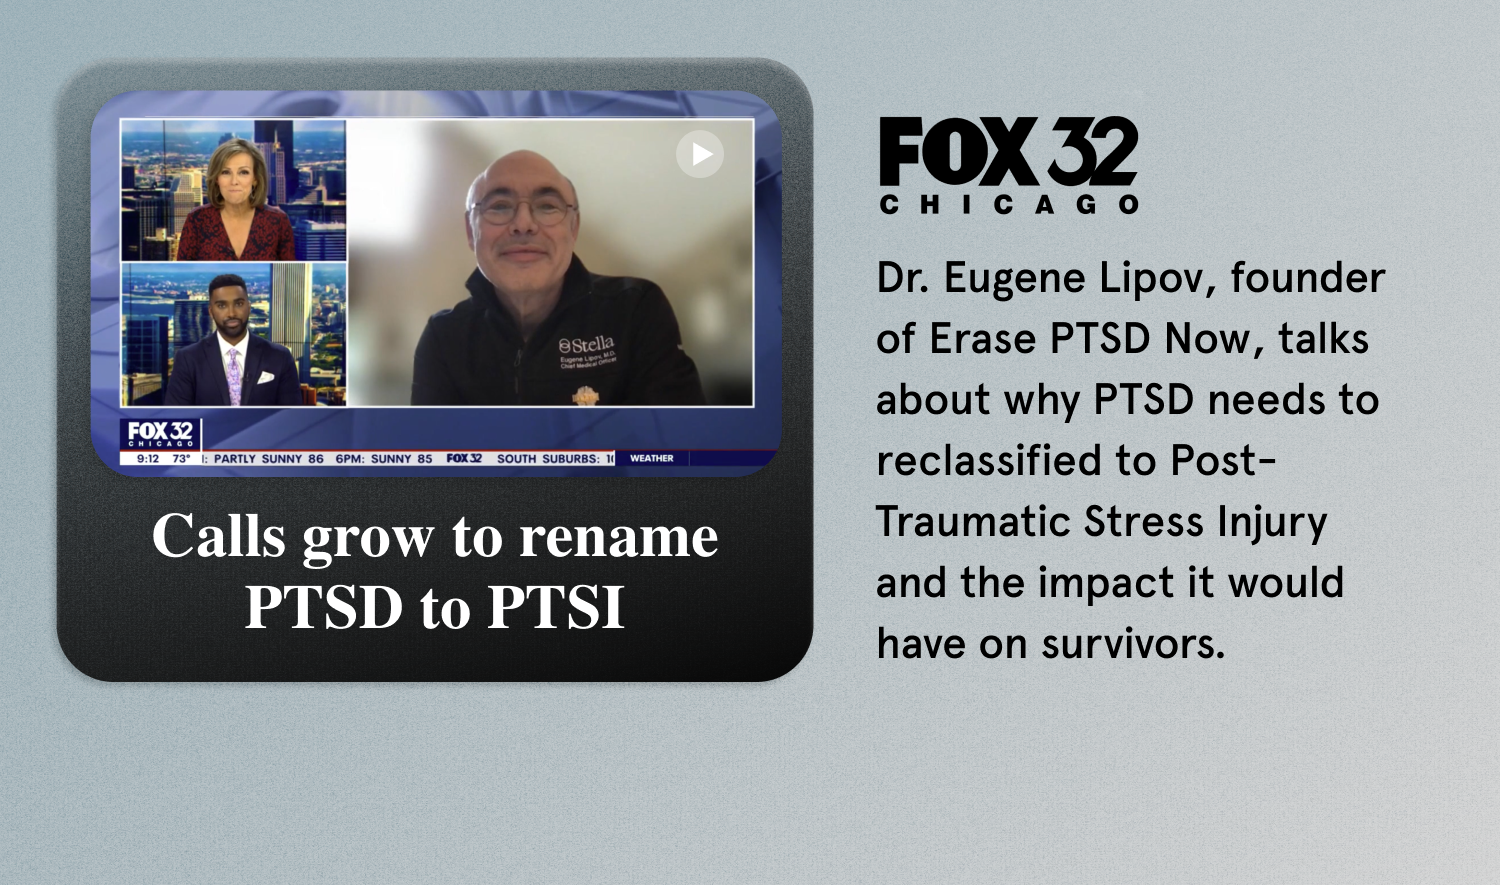 An advertisement for Fox 32 Chicago shows Dr. Lipov talking about PTSD and PTSI